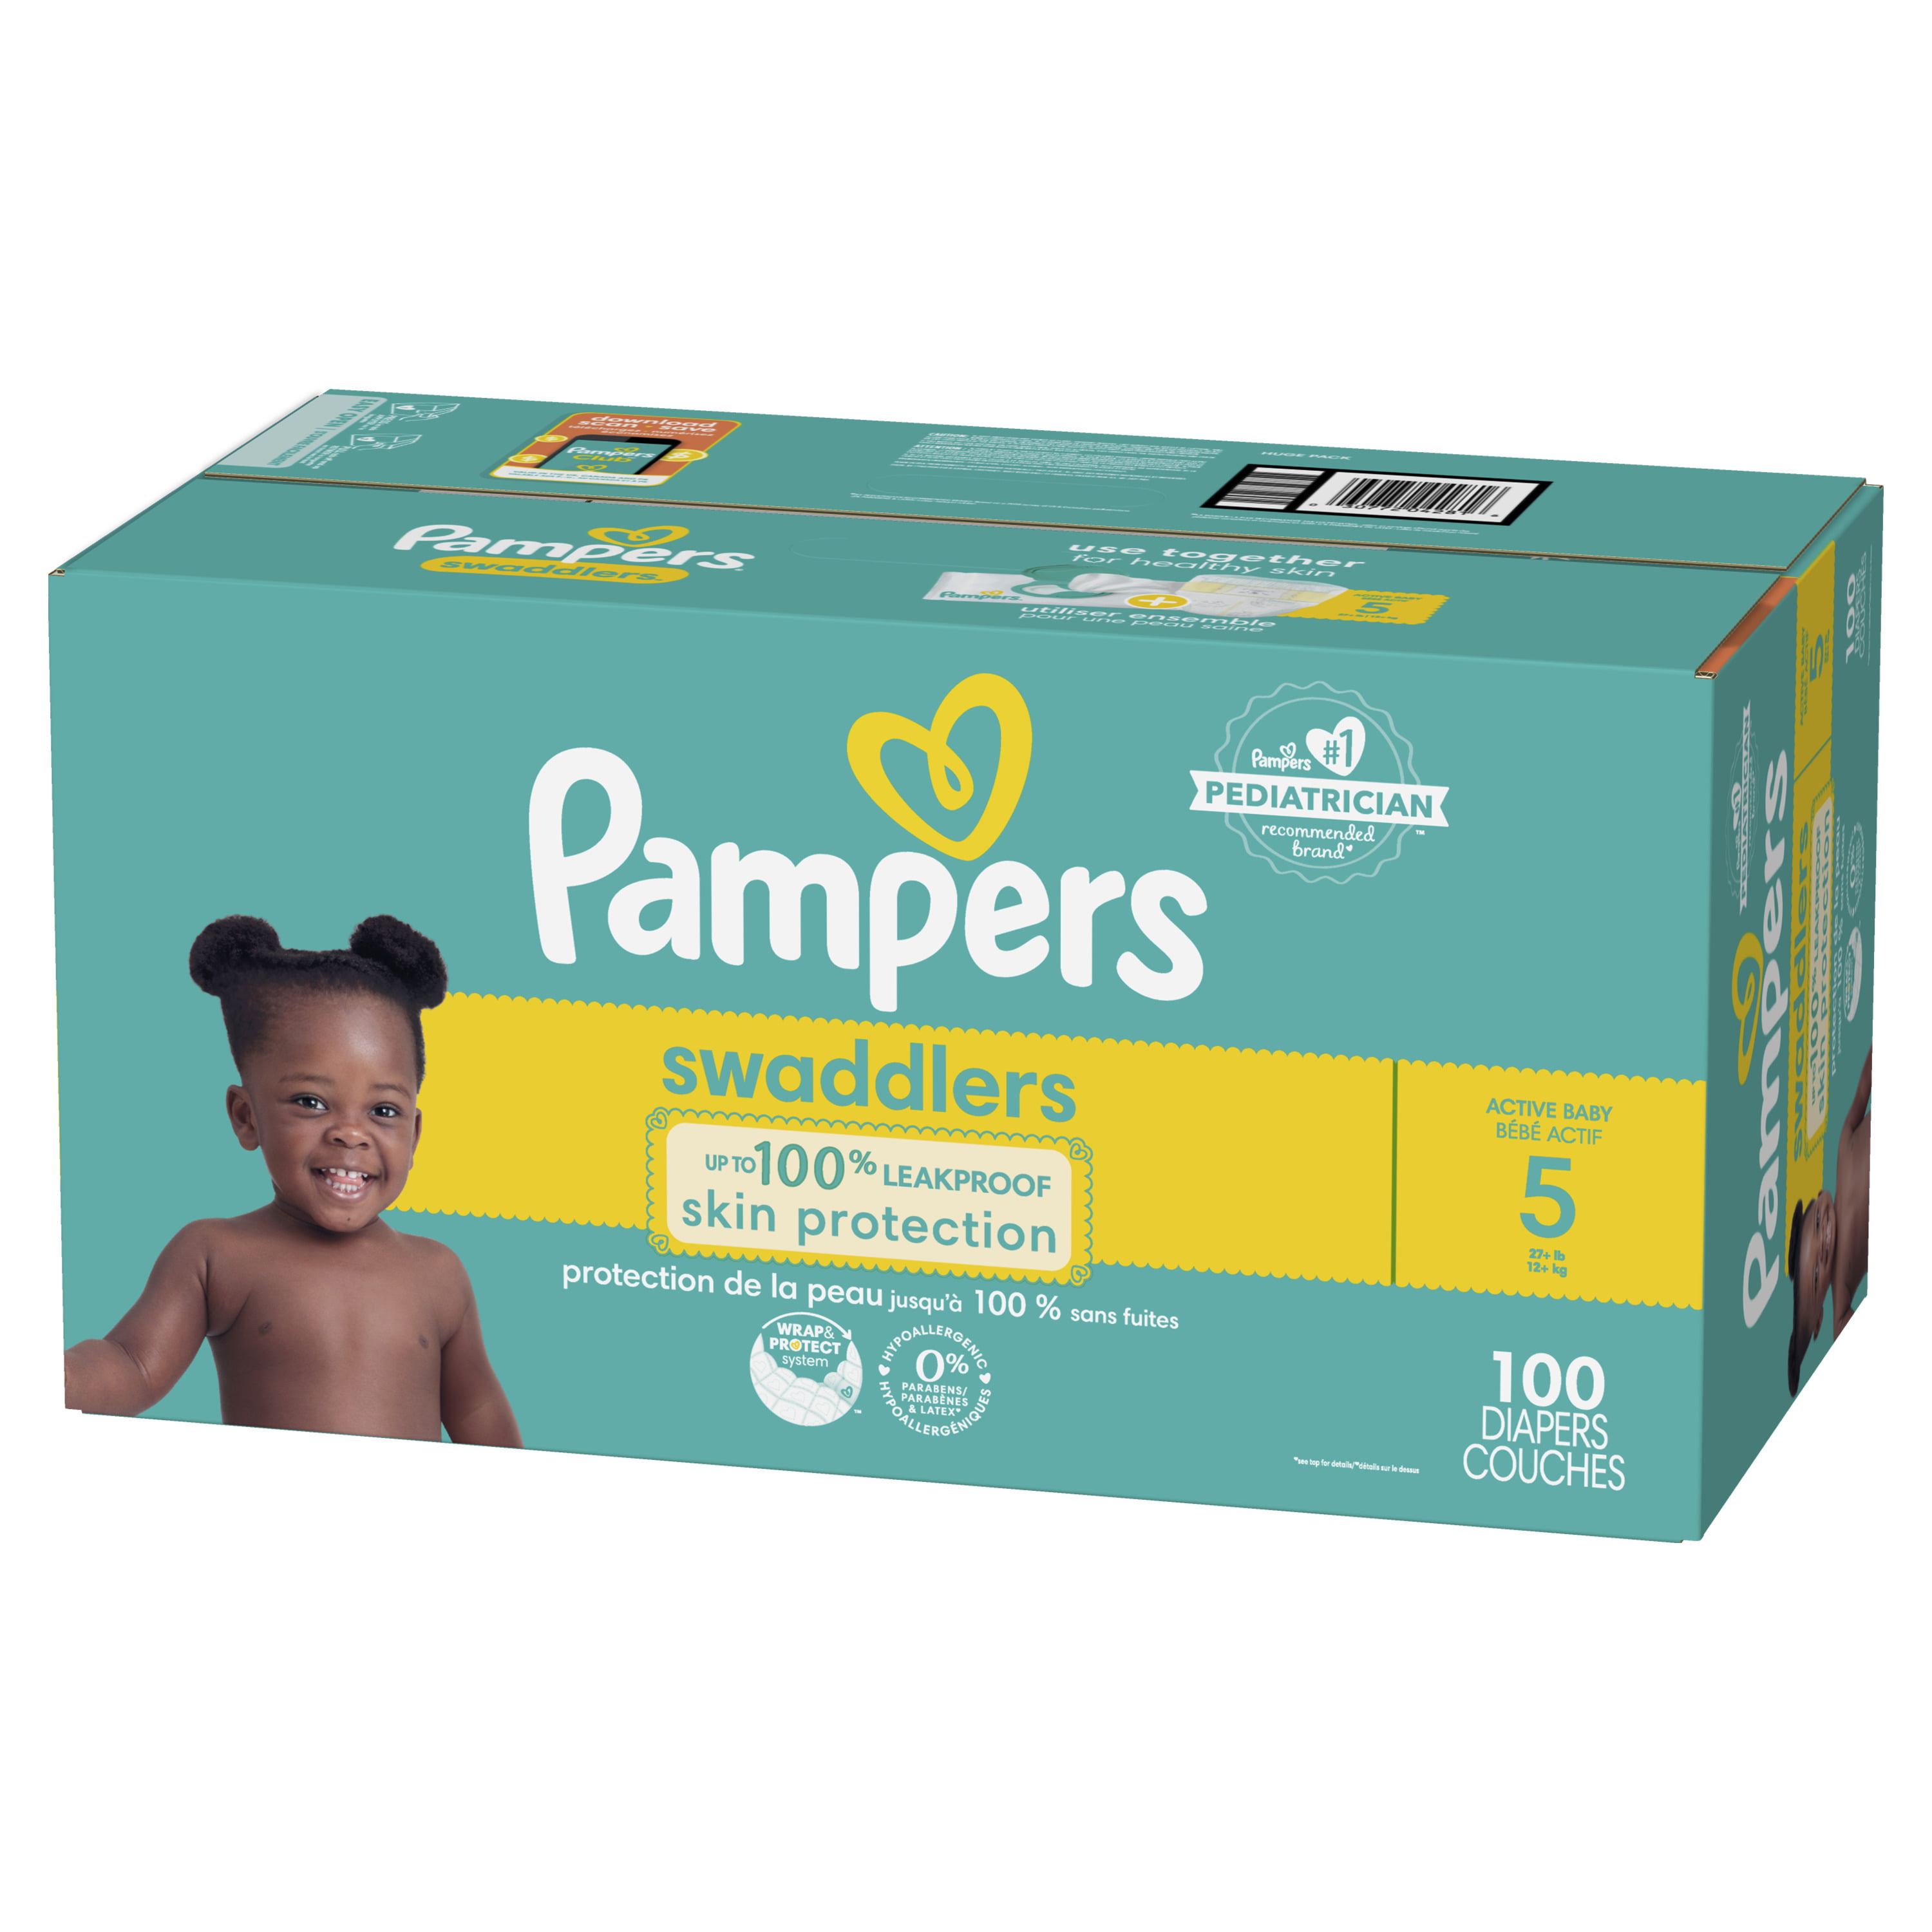 Pampers Swaddlers Diaper, Soft and Absorbent, Size 5, 100 Count - 3